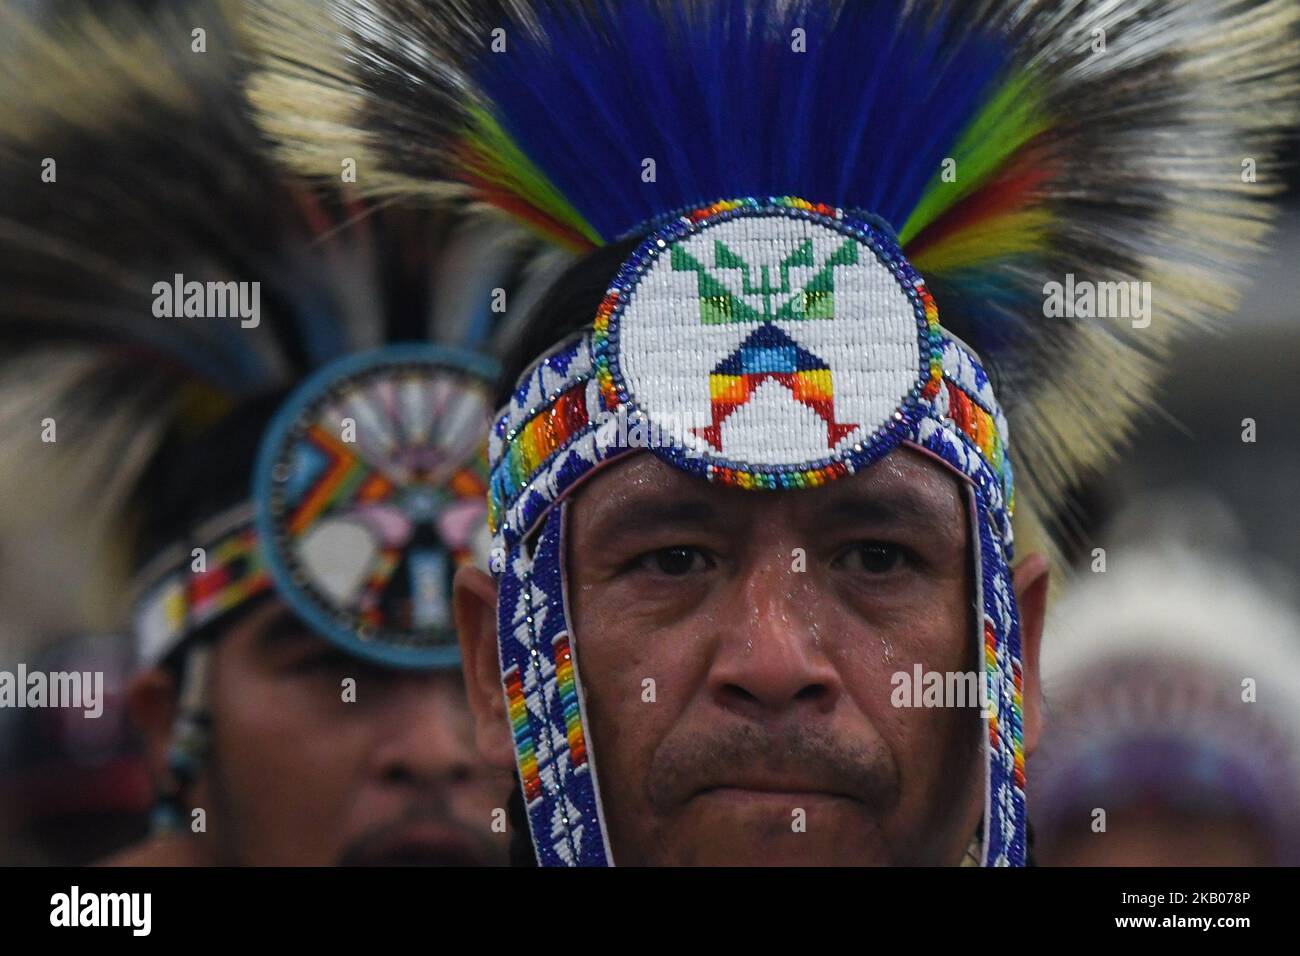 Members of the First Nations during the third annual traditional Pow Wow competition, at the K-Days Festival in Edmonton. Over 700 First Nations dancers from dozens of different tribes will be featured at K-Days in Edmonton over three days this week. On Tuesday, July 24, 2018, in Edmonton, Alberta, Canada. (Photo by Artur Widak/NurPhoto)  Stock Photo